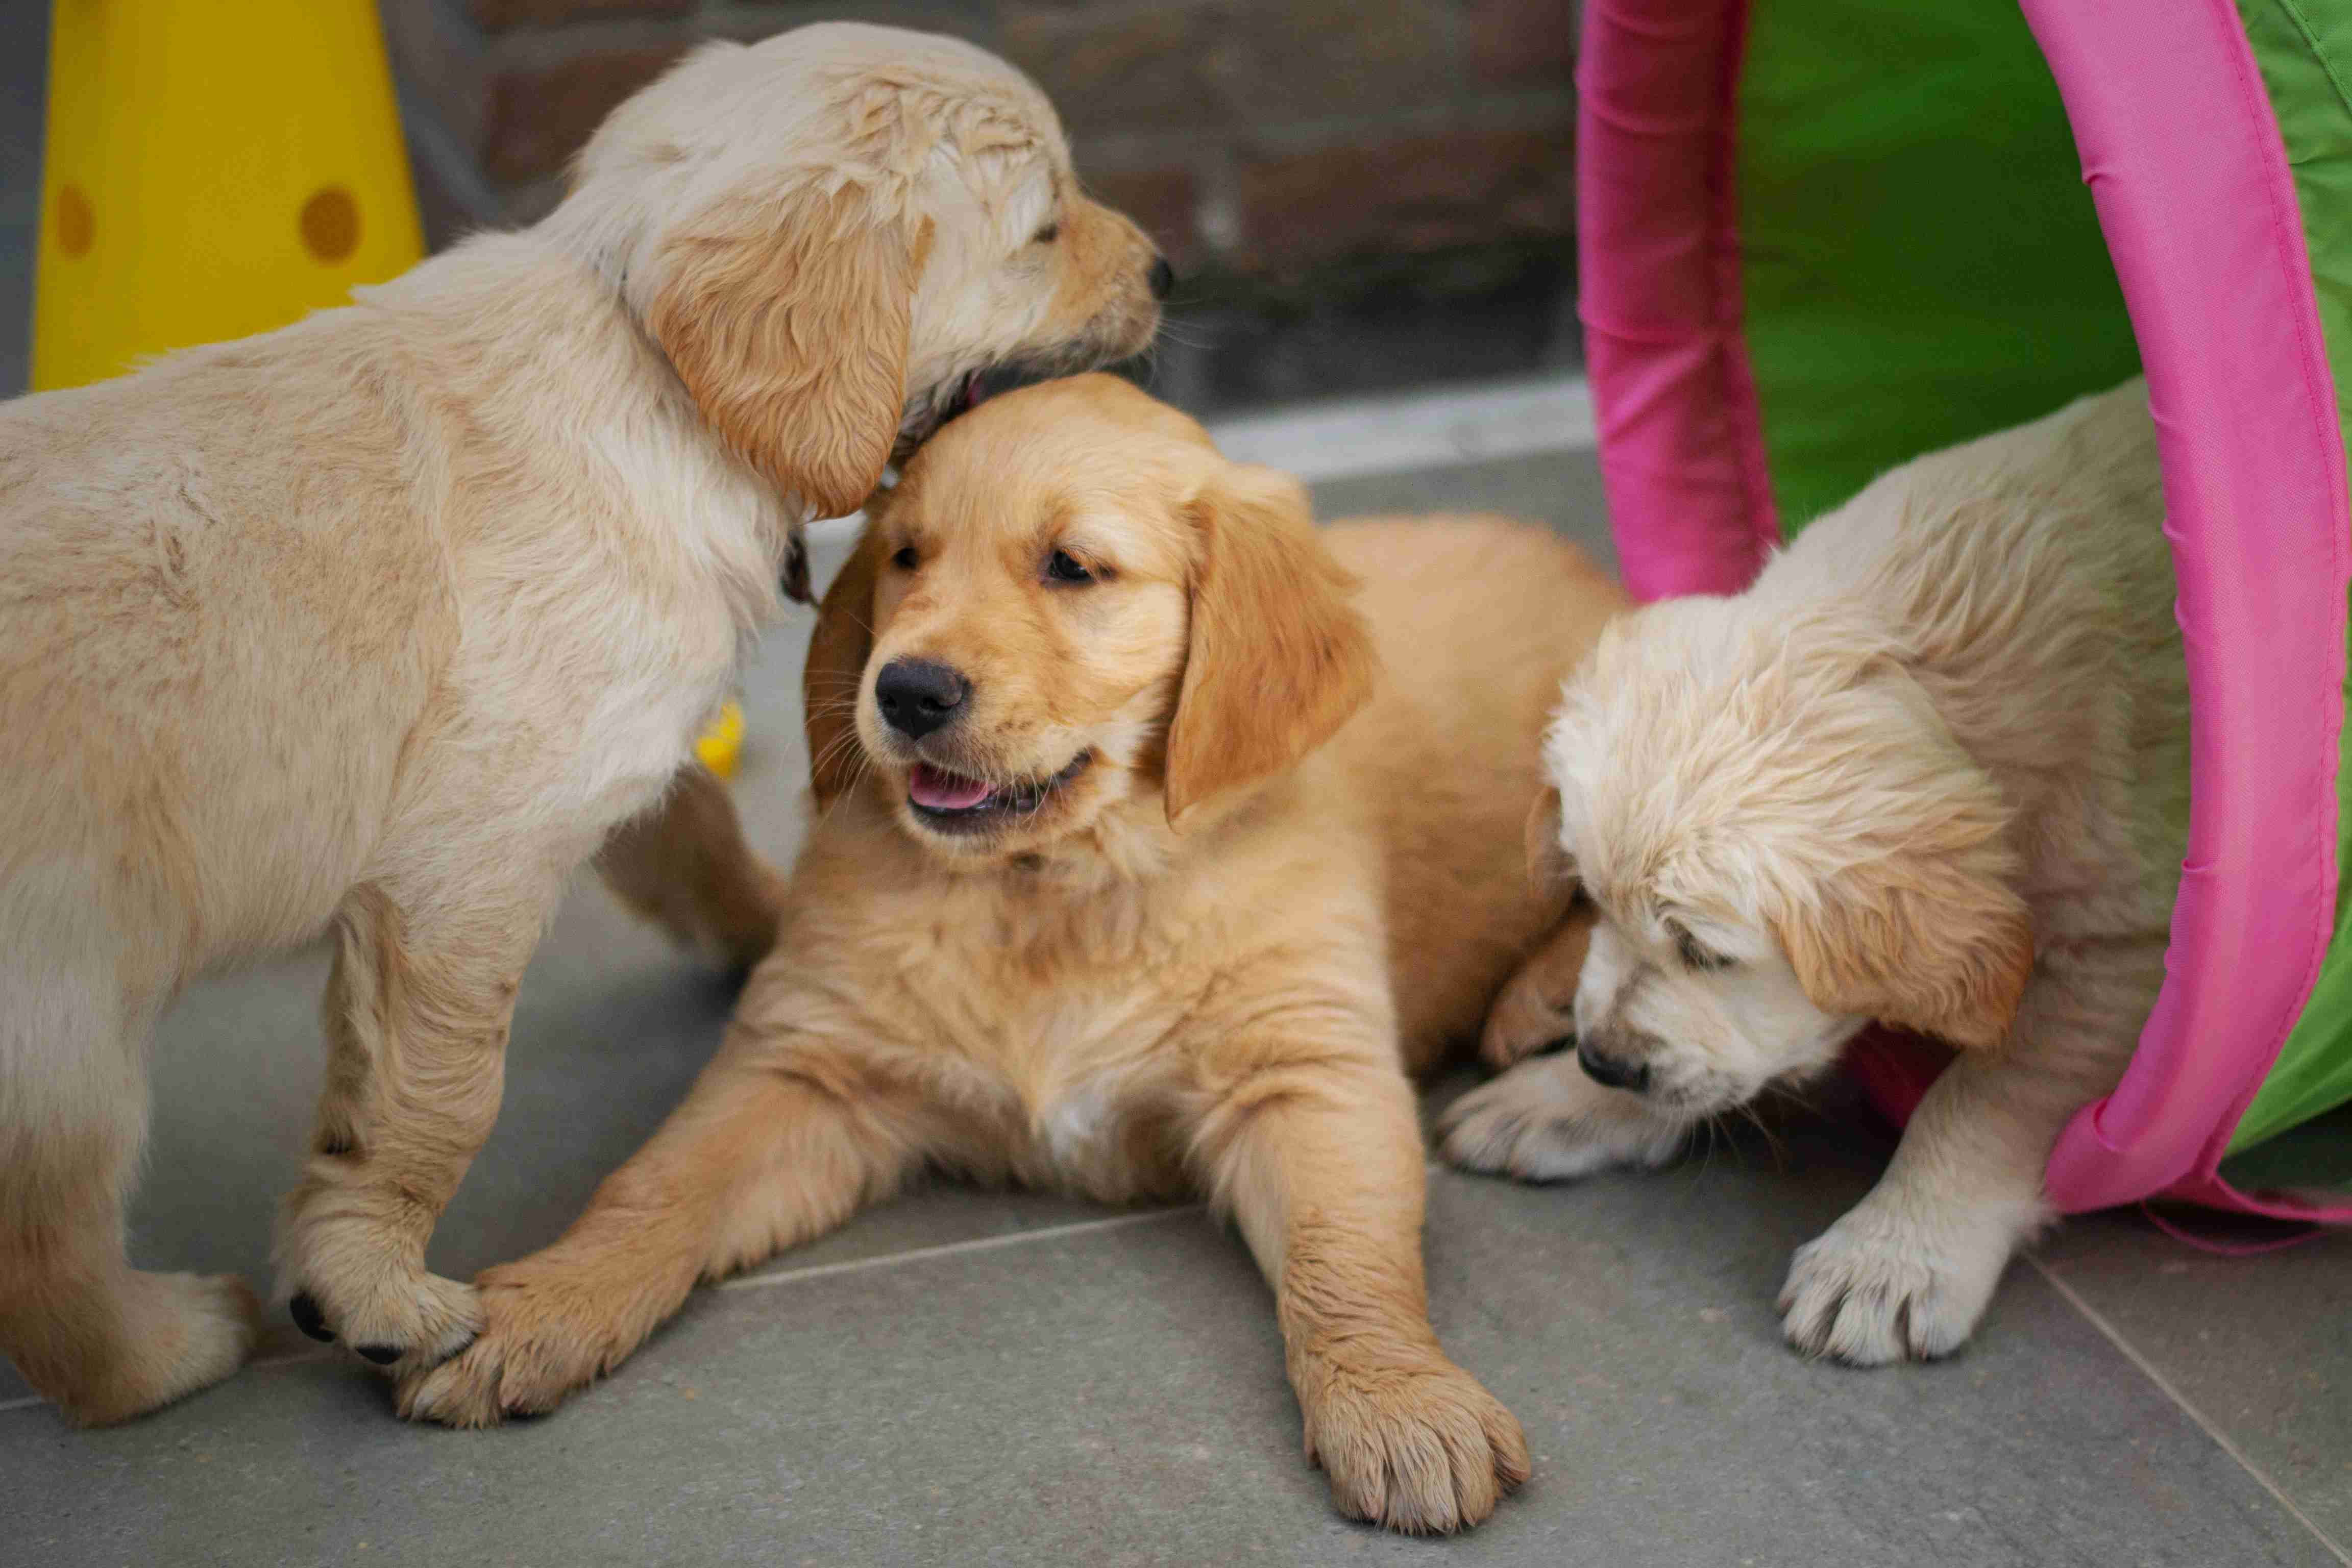 How can I crate train my Golden Retriever?